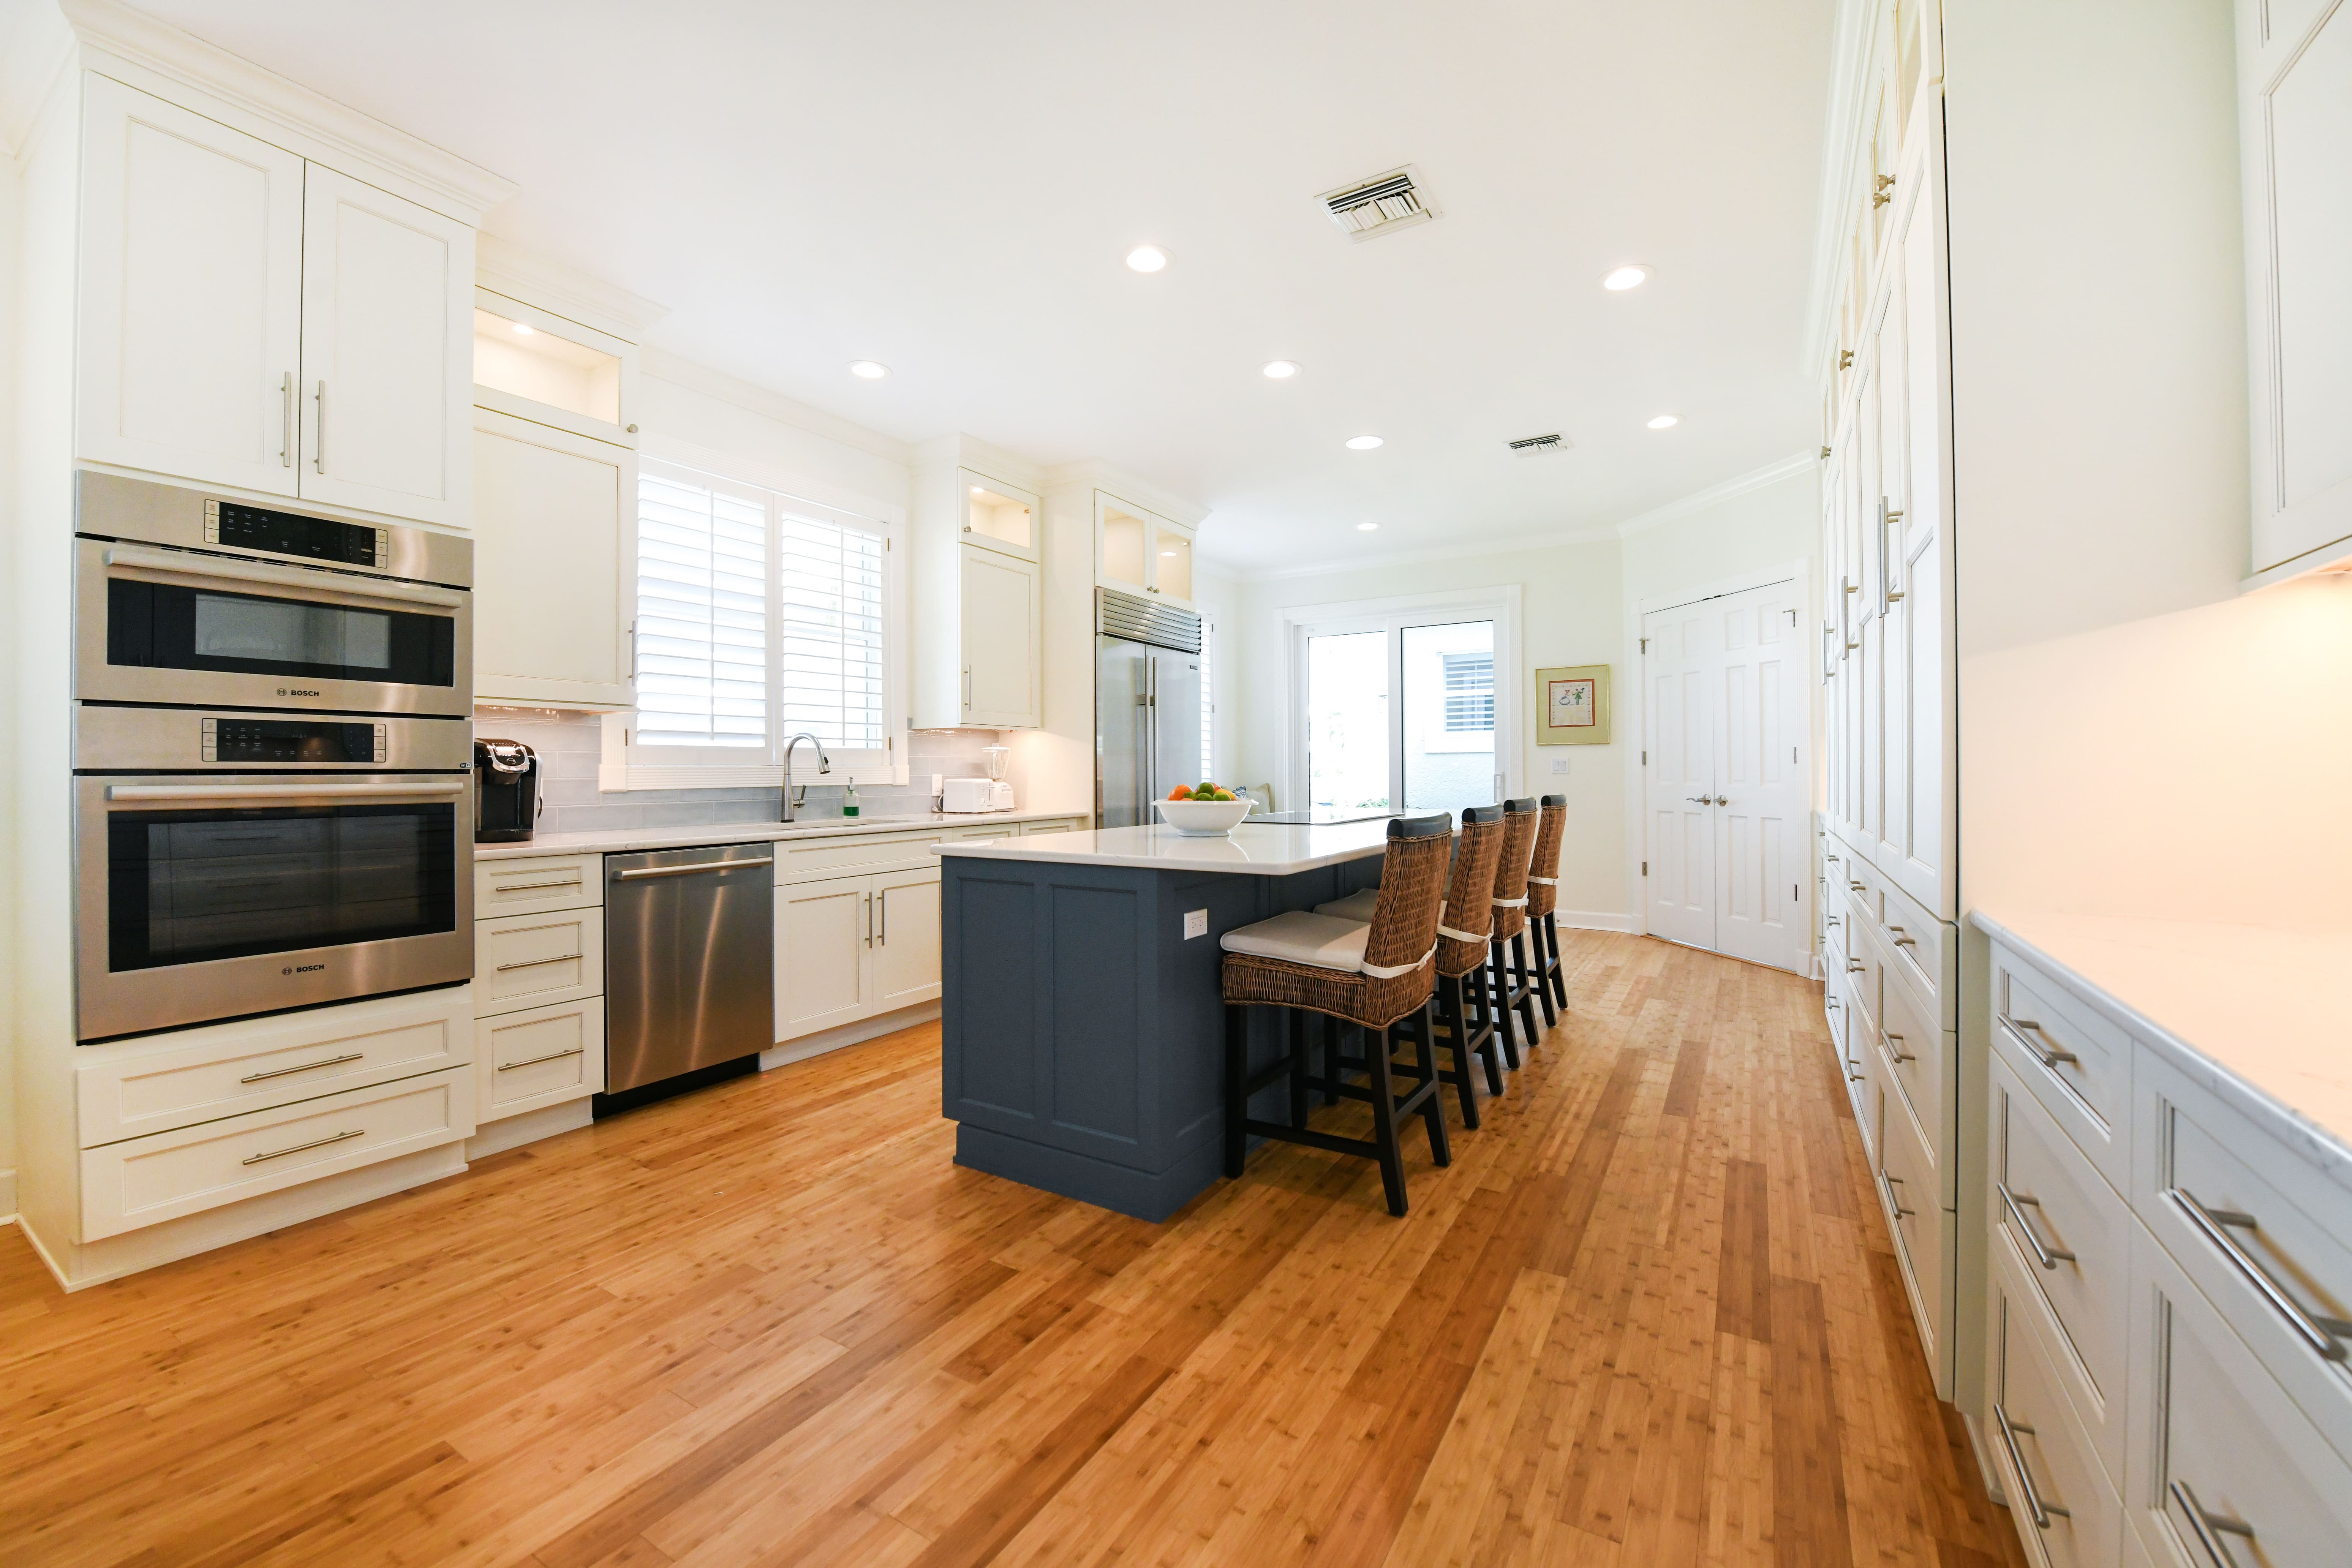 Beautiful Wood Floor in Remodeled Kitchen with Built in Appliances in Sarasota